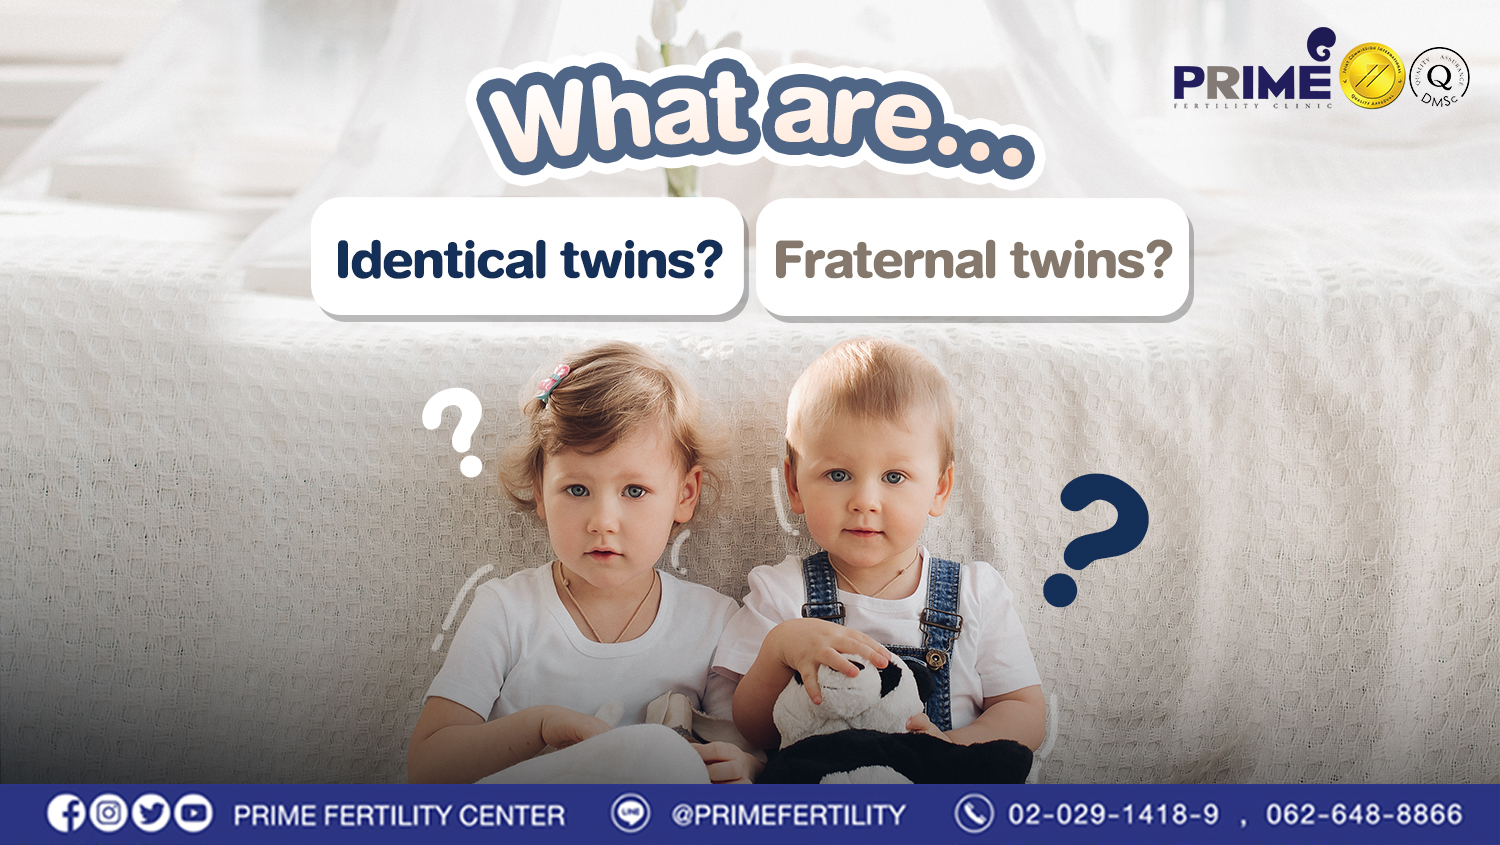 What are identical twins or fraternal twins?